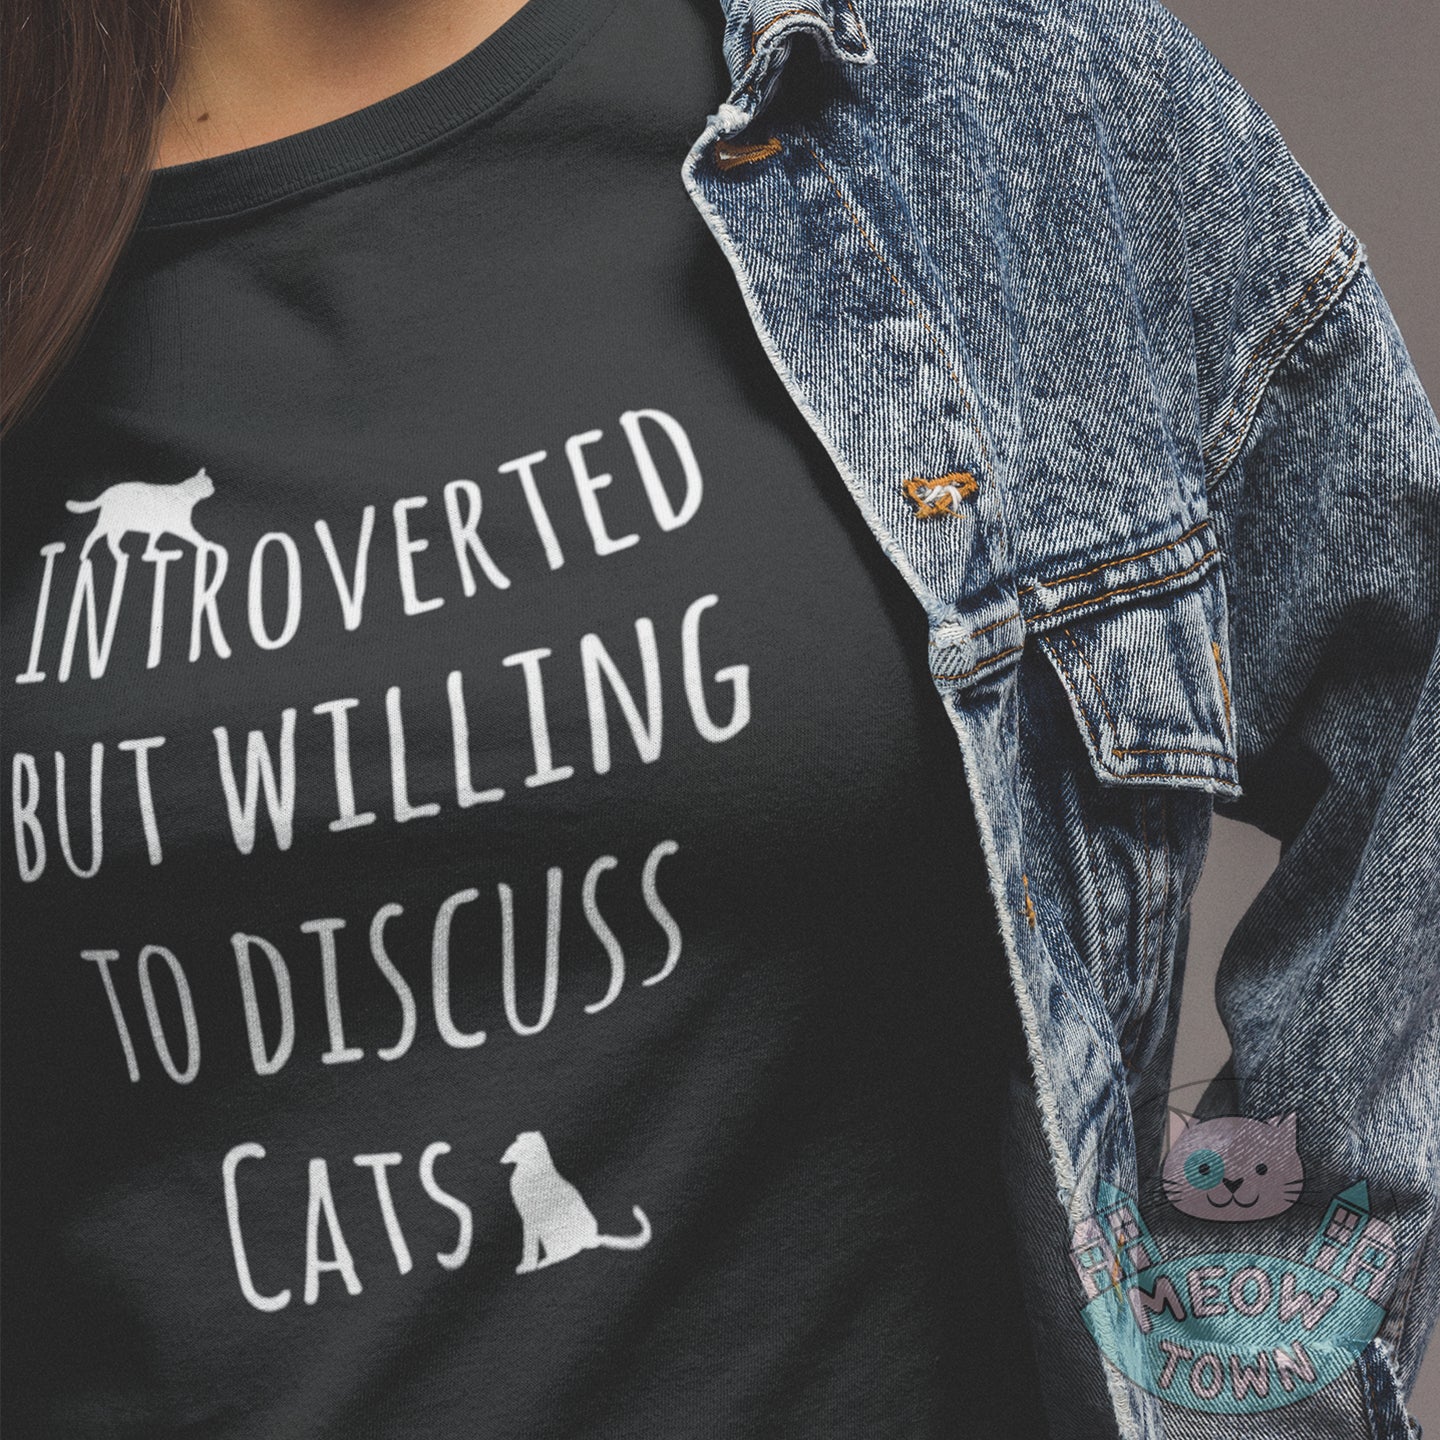 Classic unisex cotton T-shirt with funny 'Intorverted but willing to discuss cats' slogan.  Meow Town Special design, you won't find it on the high street! Printed exclusively for You in the UK by us. Classic unisex tee true to size. Perfect gift for cat lovers.